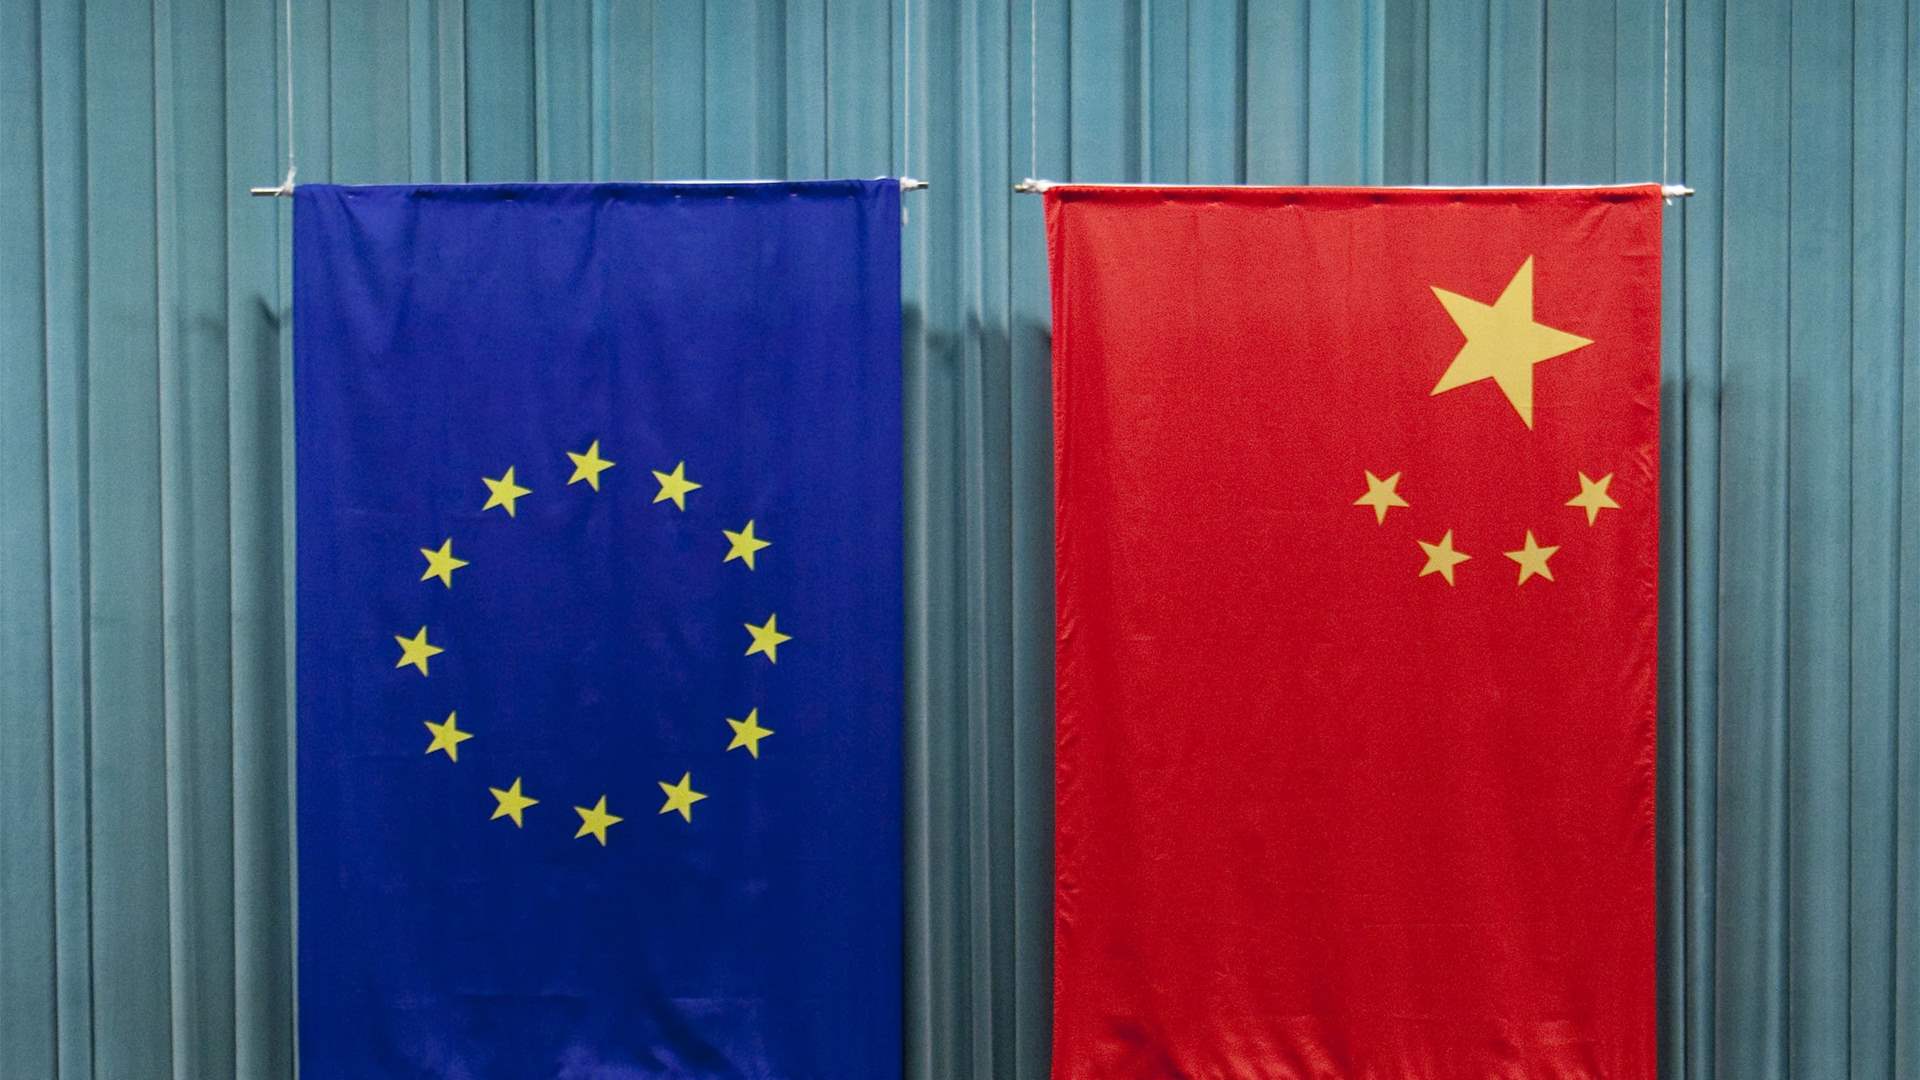 Climate officials from EU and China to engage in talks next week